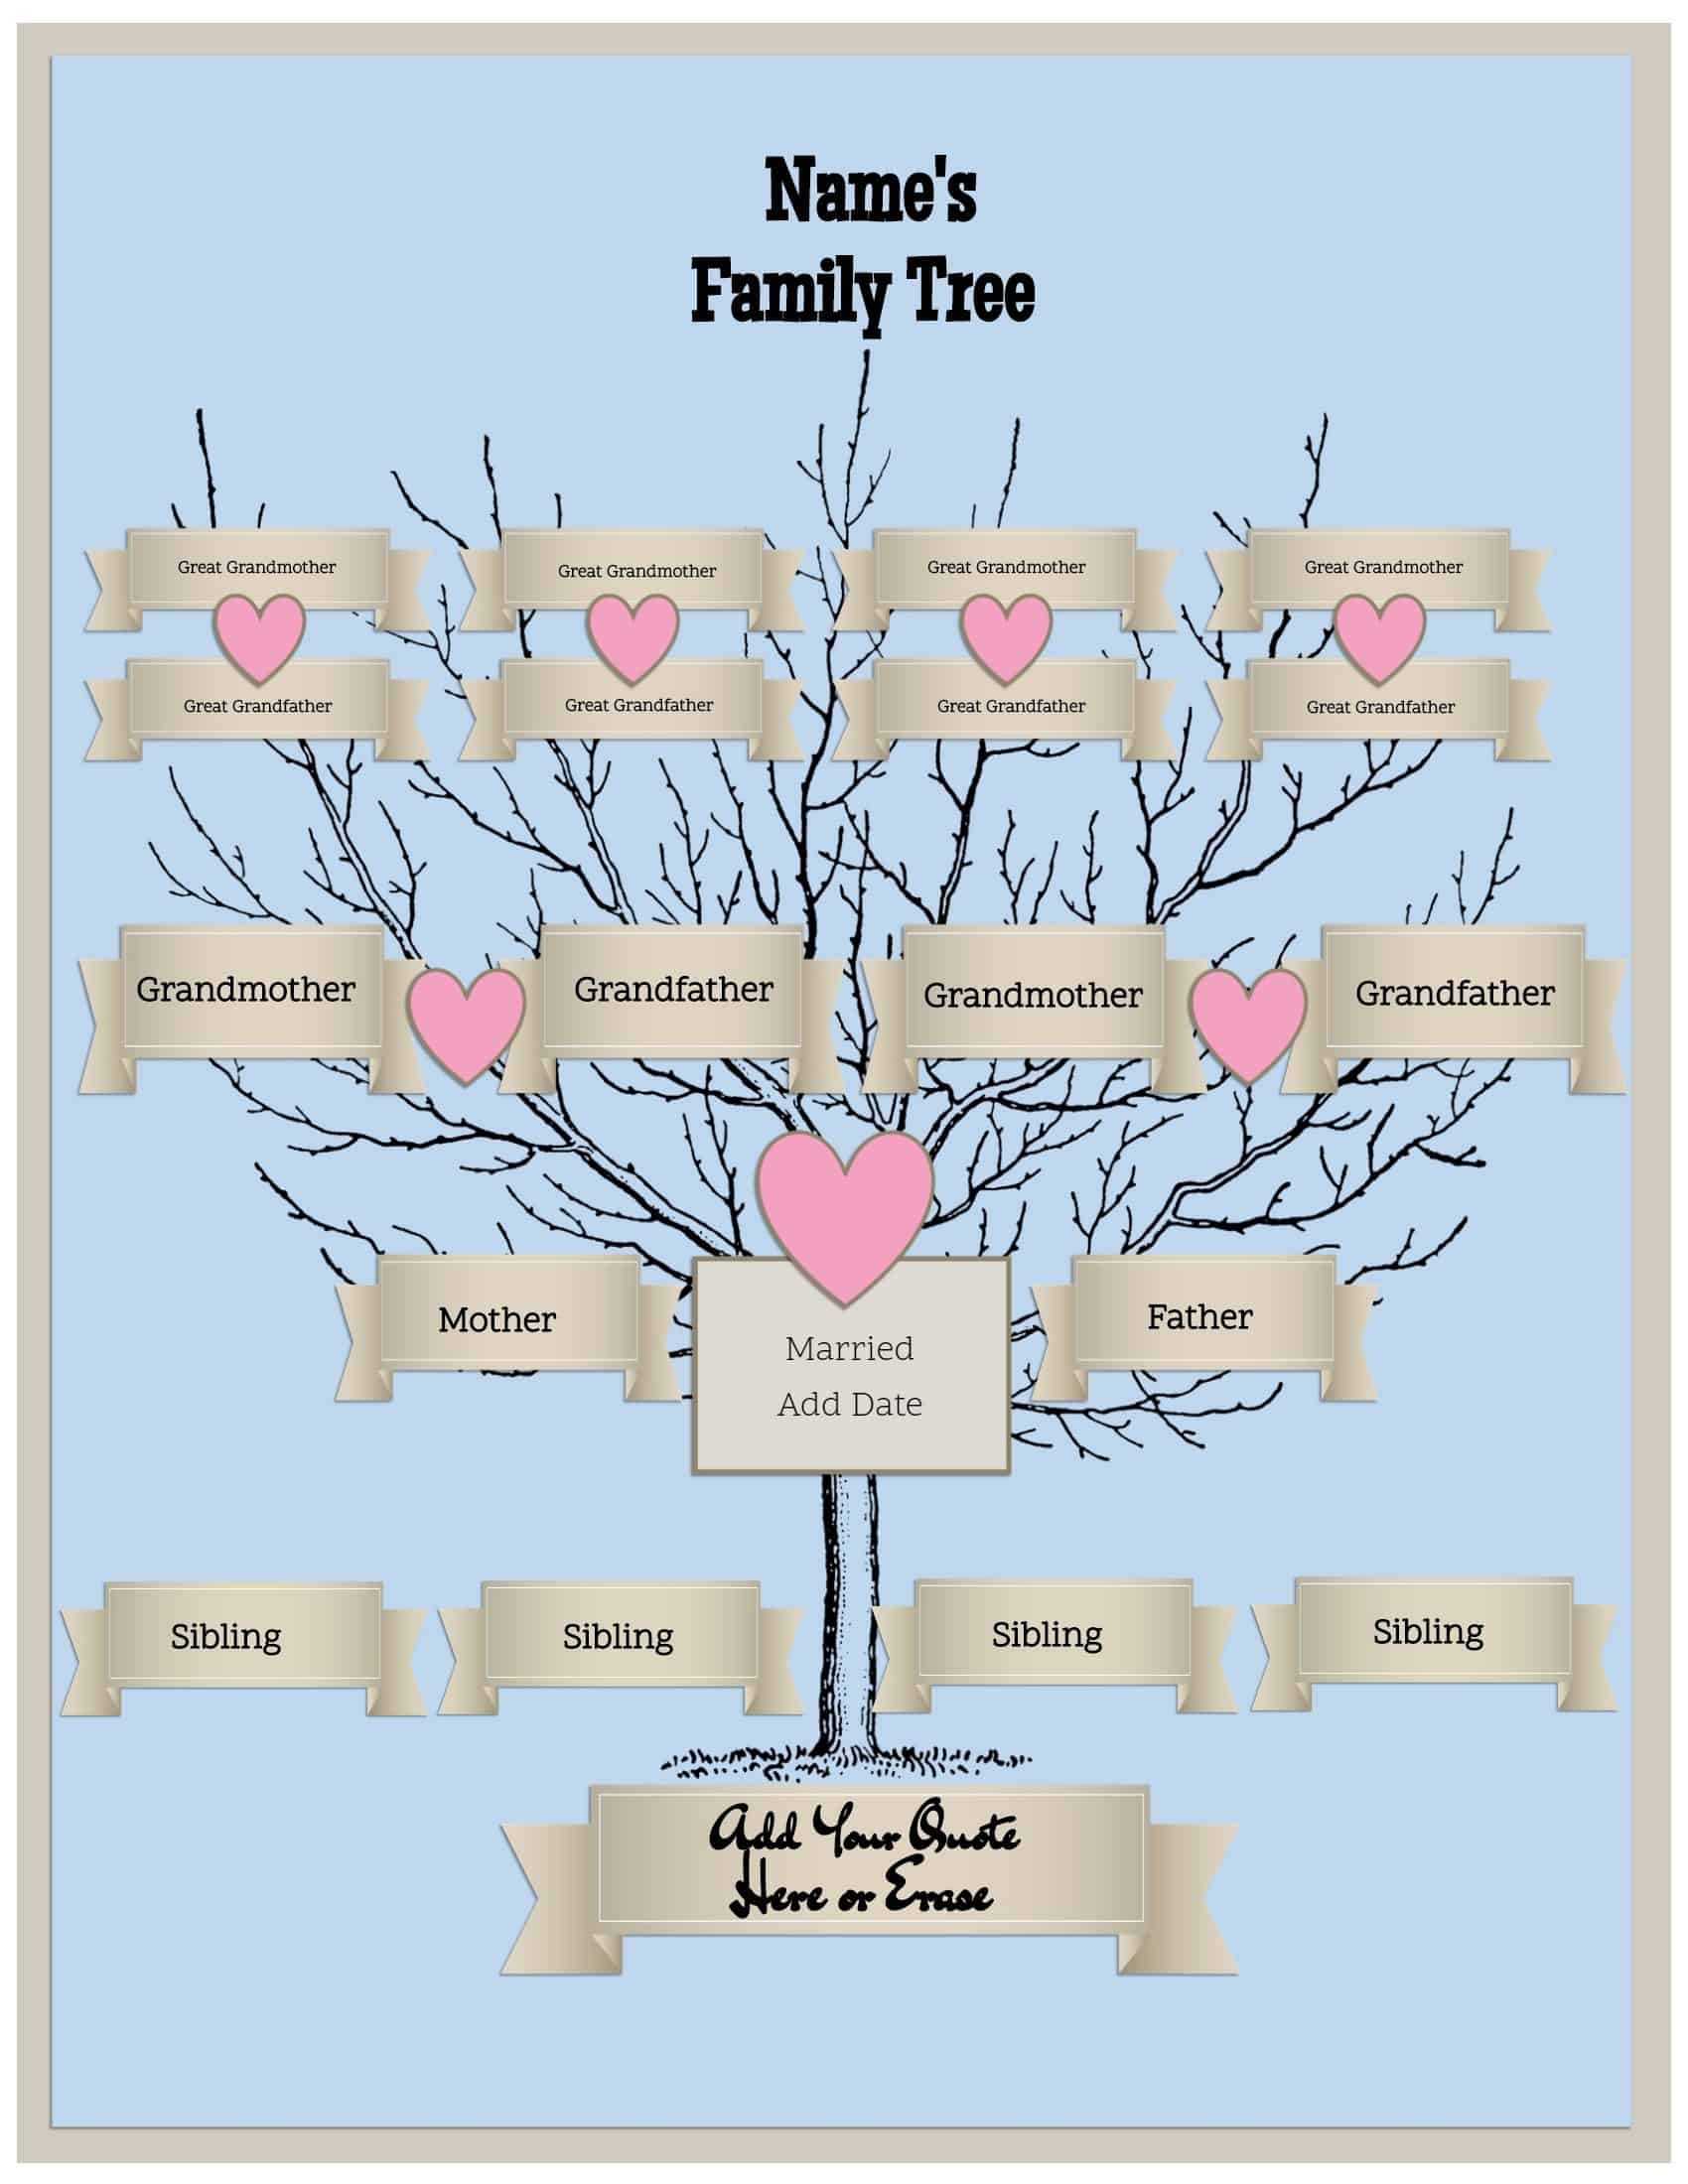 Four Generations In Blank Family Tree Template 3 Generations